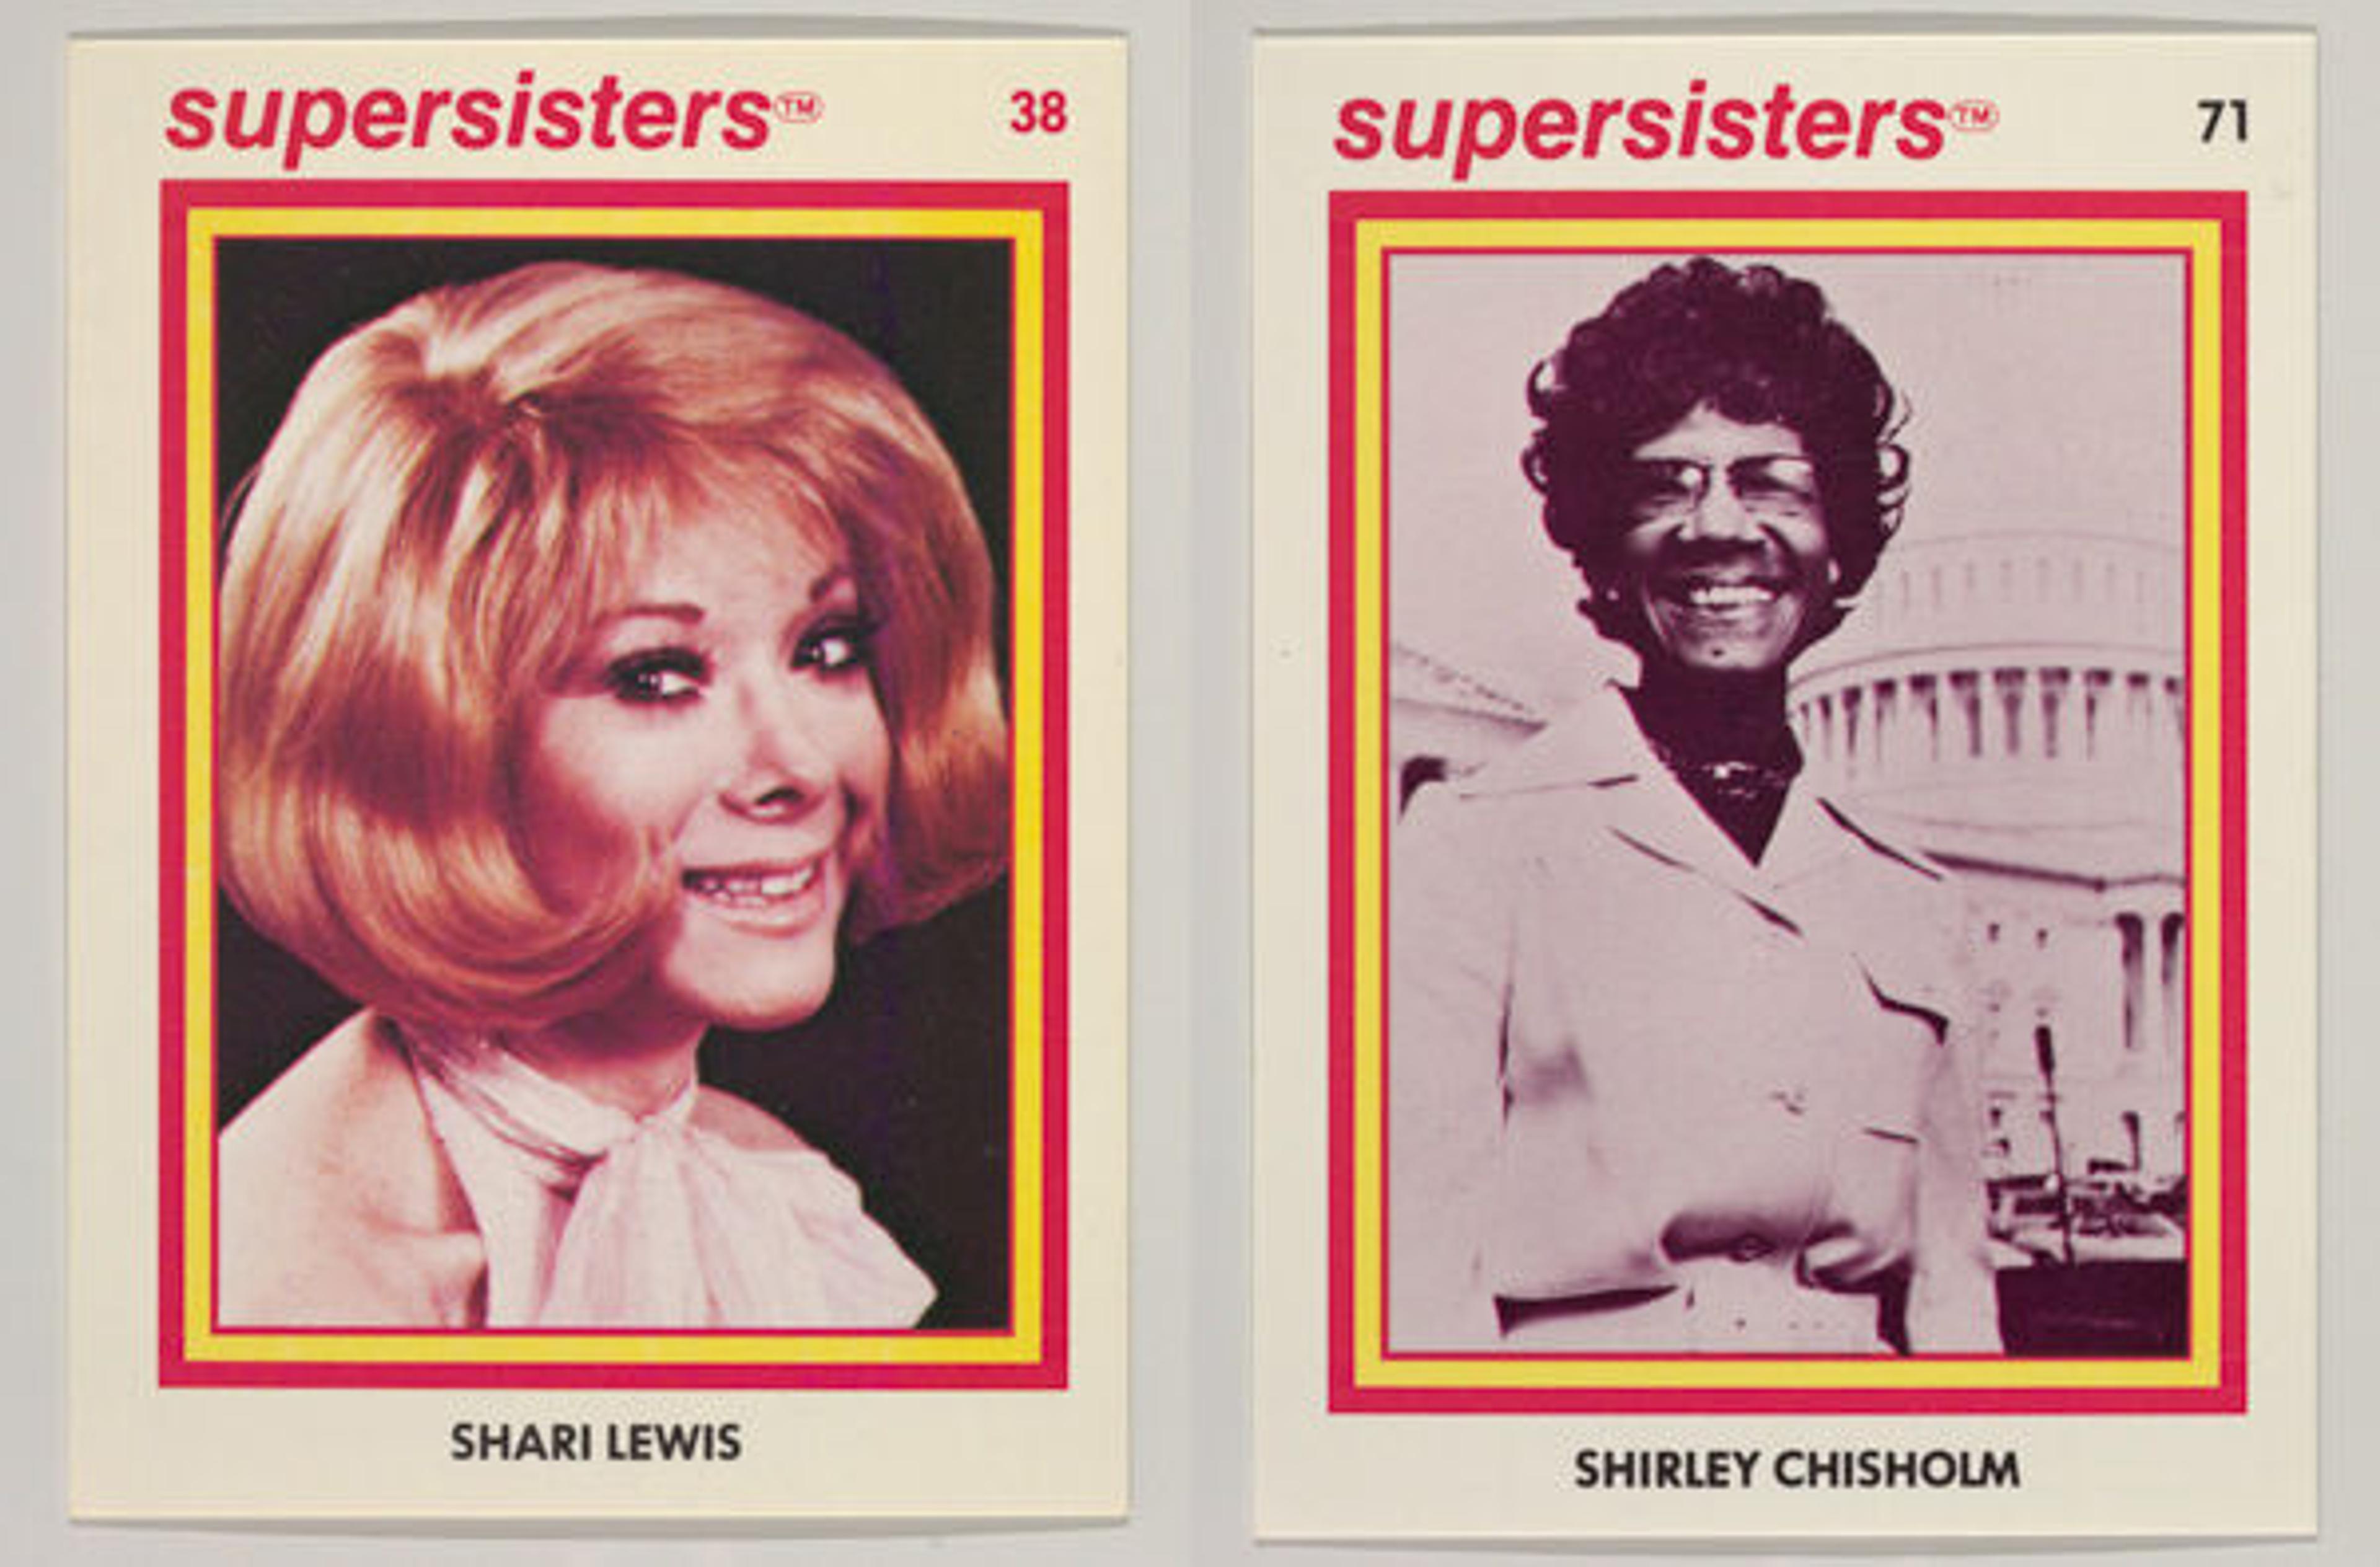 Left: Shari Lewis, Supersisters No. 38; Right: Shirley Chisholm, Supersisters No. 71